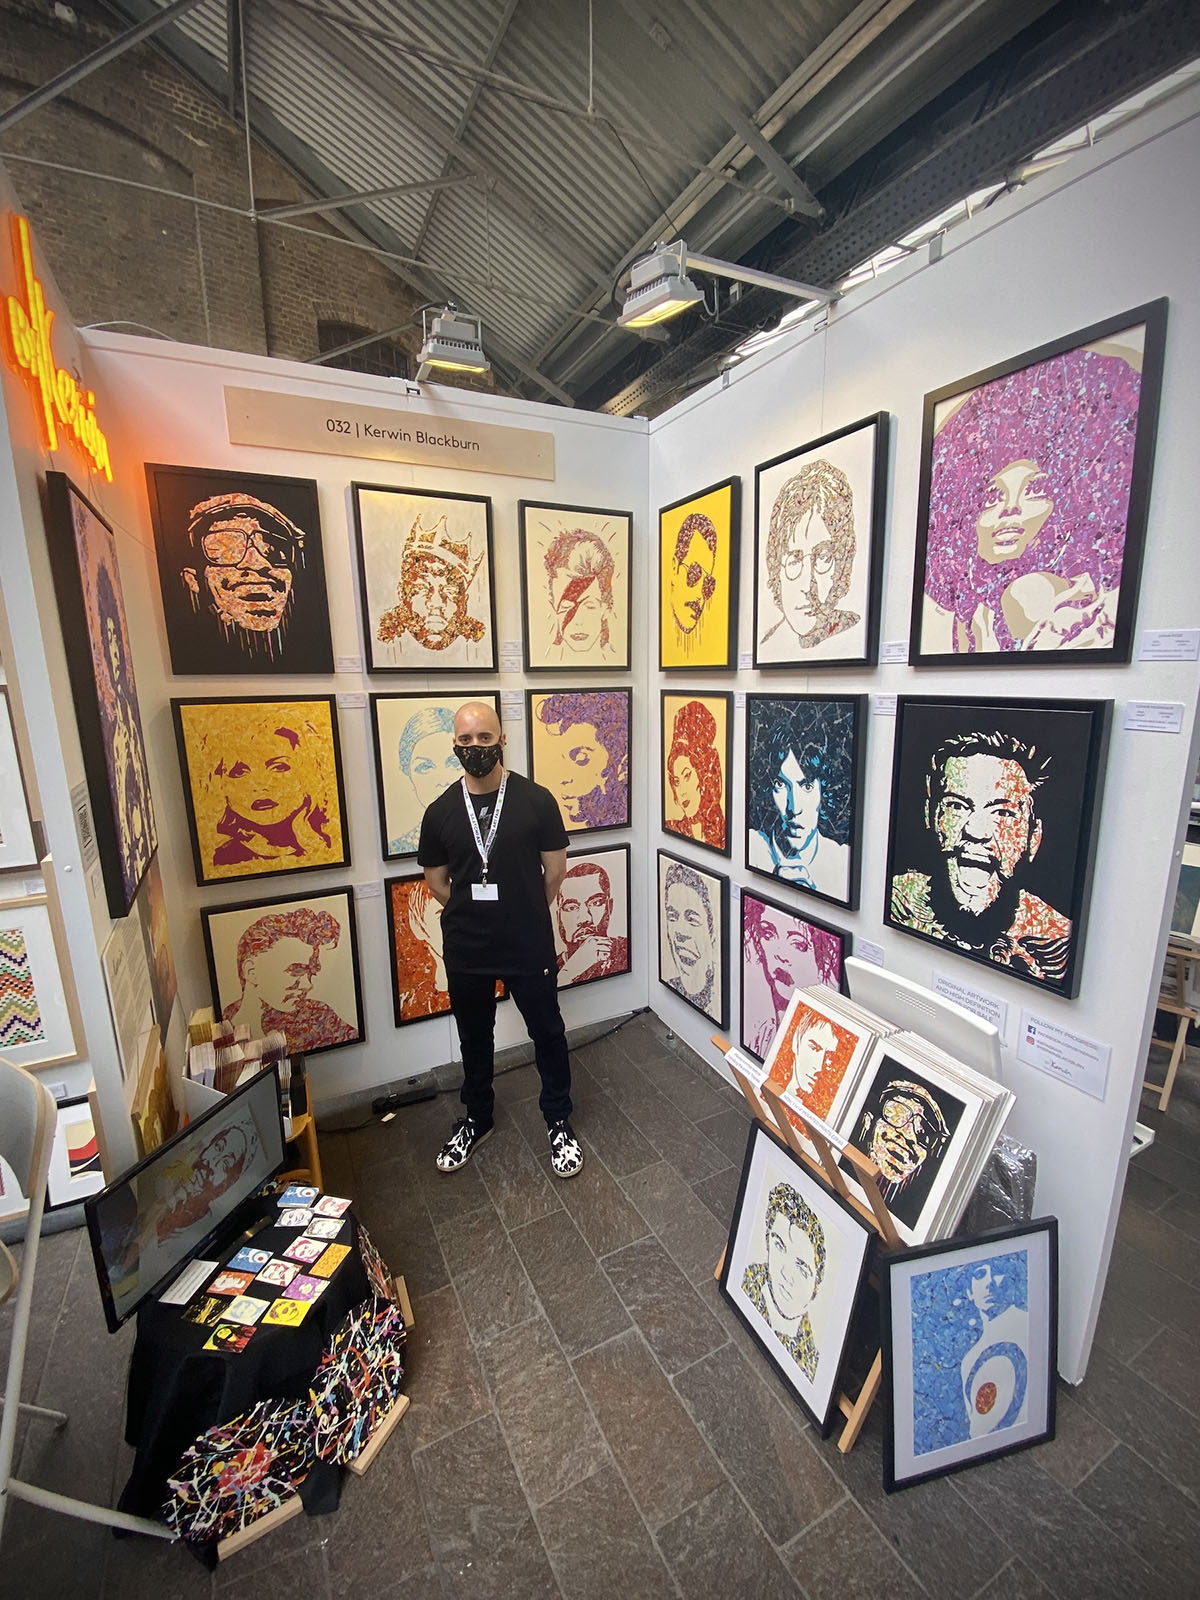 Kerwin Blackburn exhibiting his Jackson Pollock inspired pop art music paintings and prints at The Other Art Fair London, July 2021